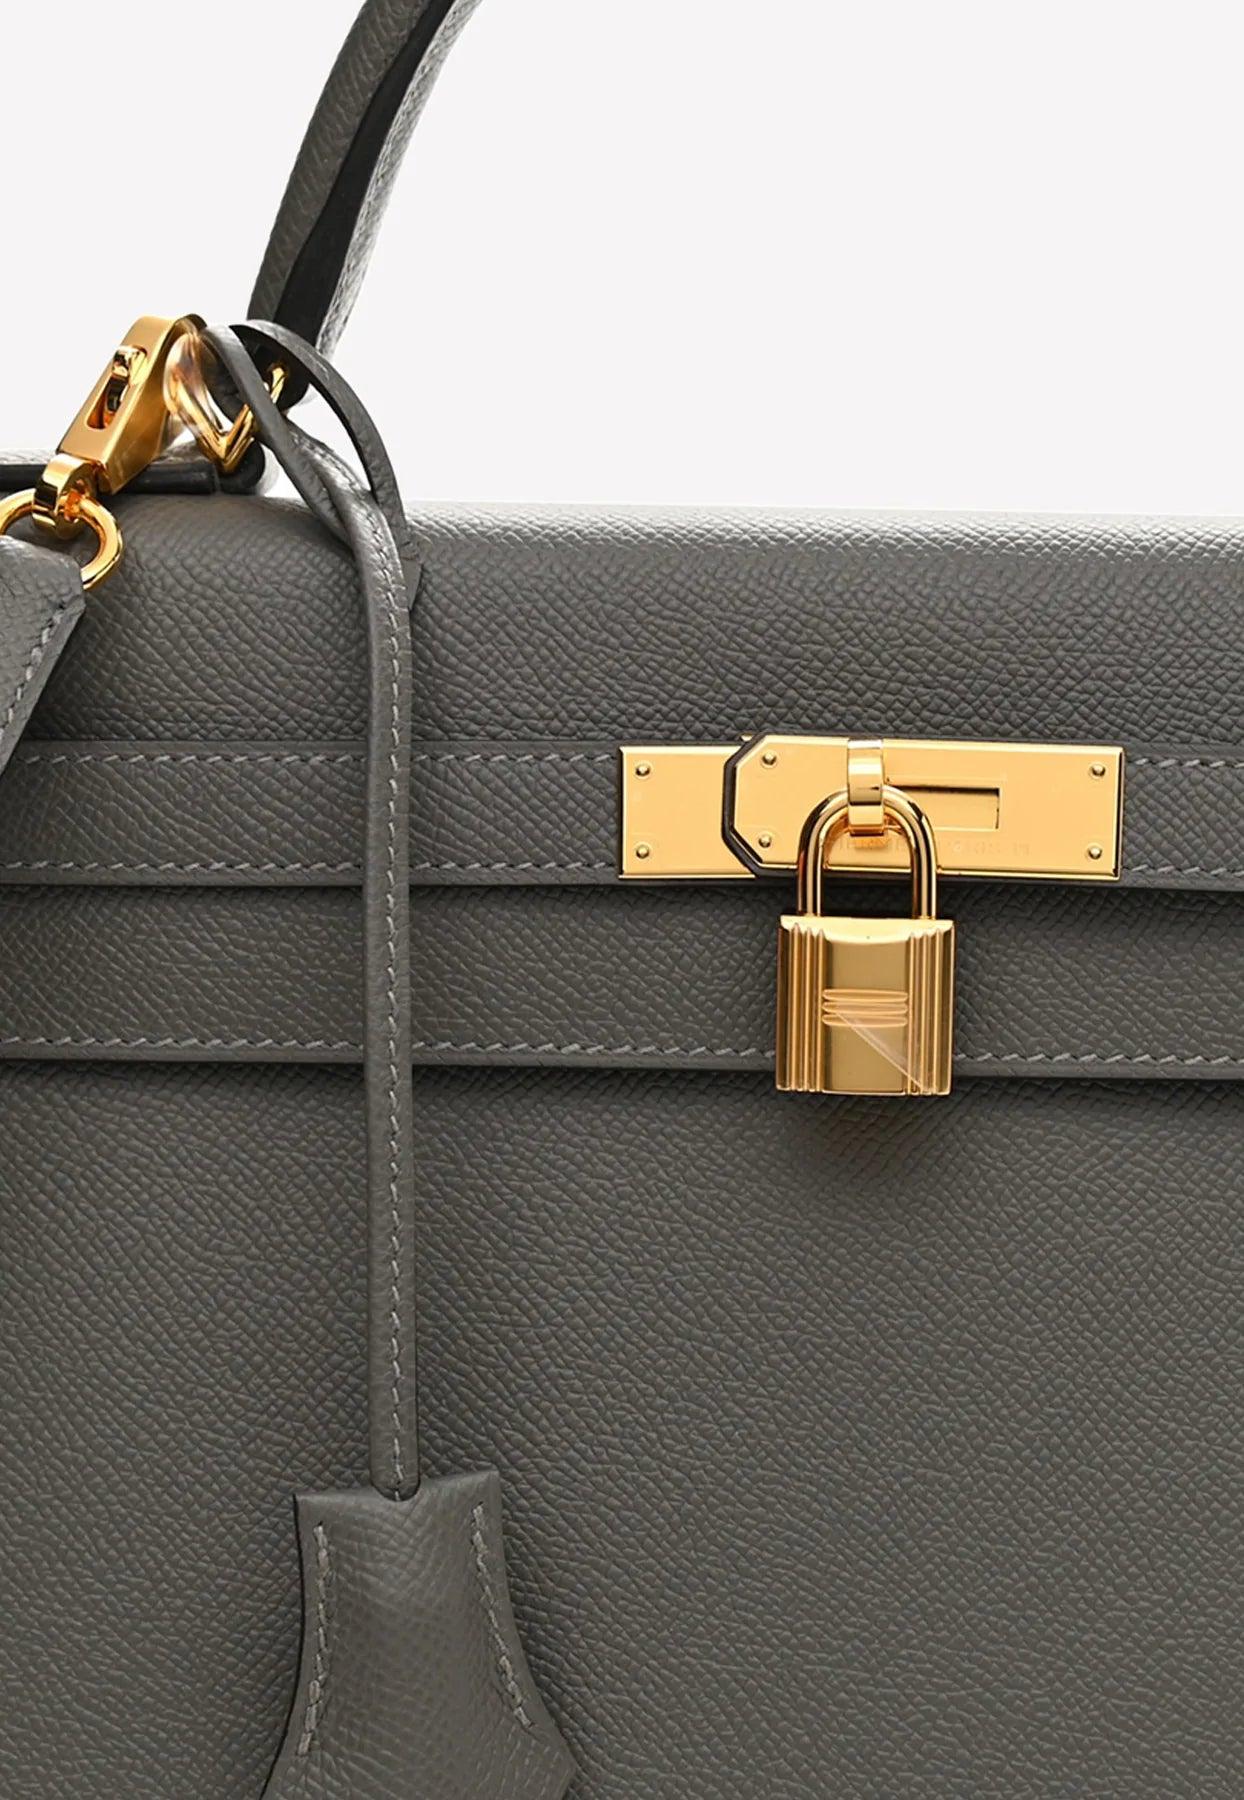 Hermès Kelly 32 Sellier In Gris Meyer Epsom With Gold Hardware in